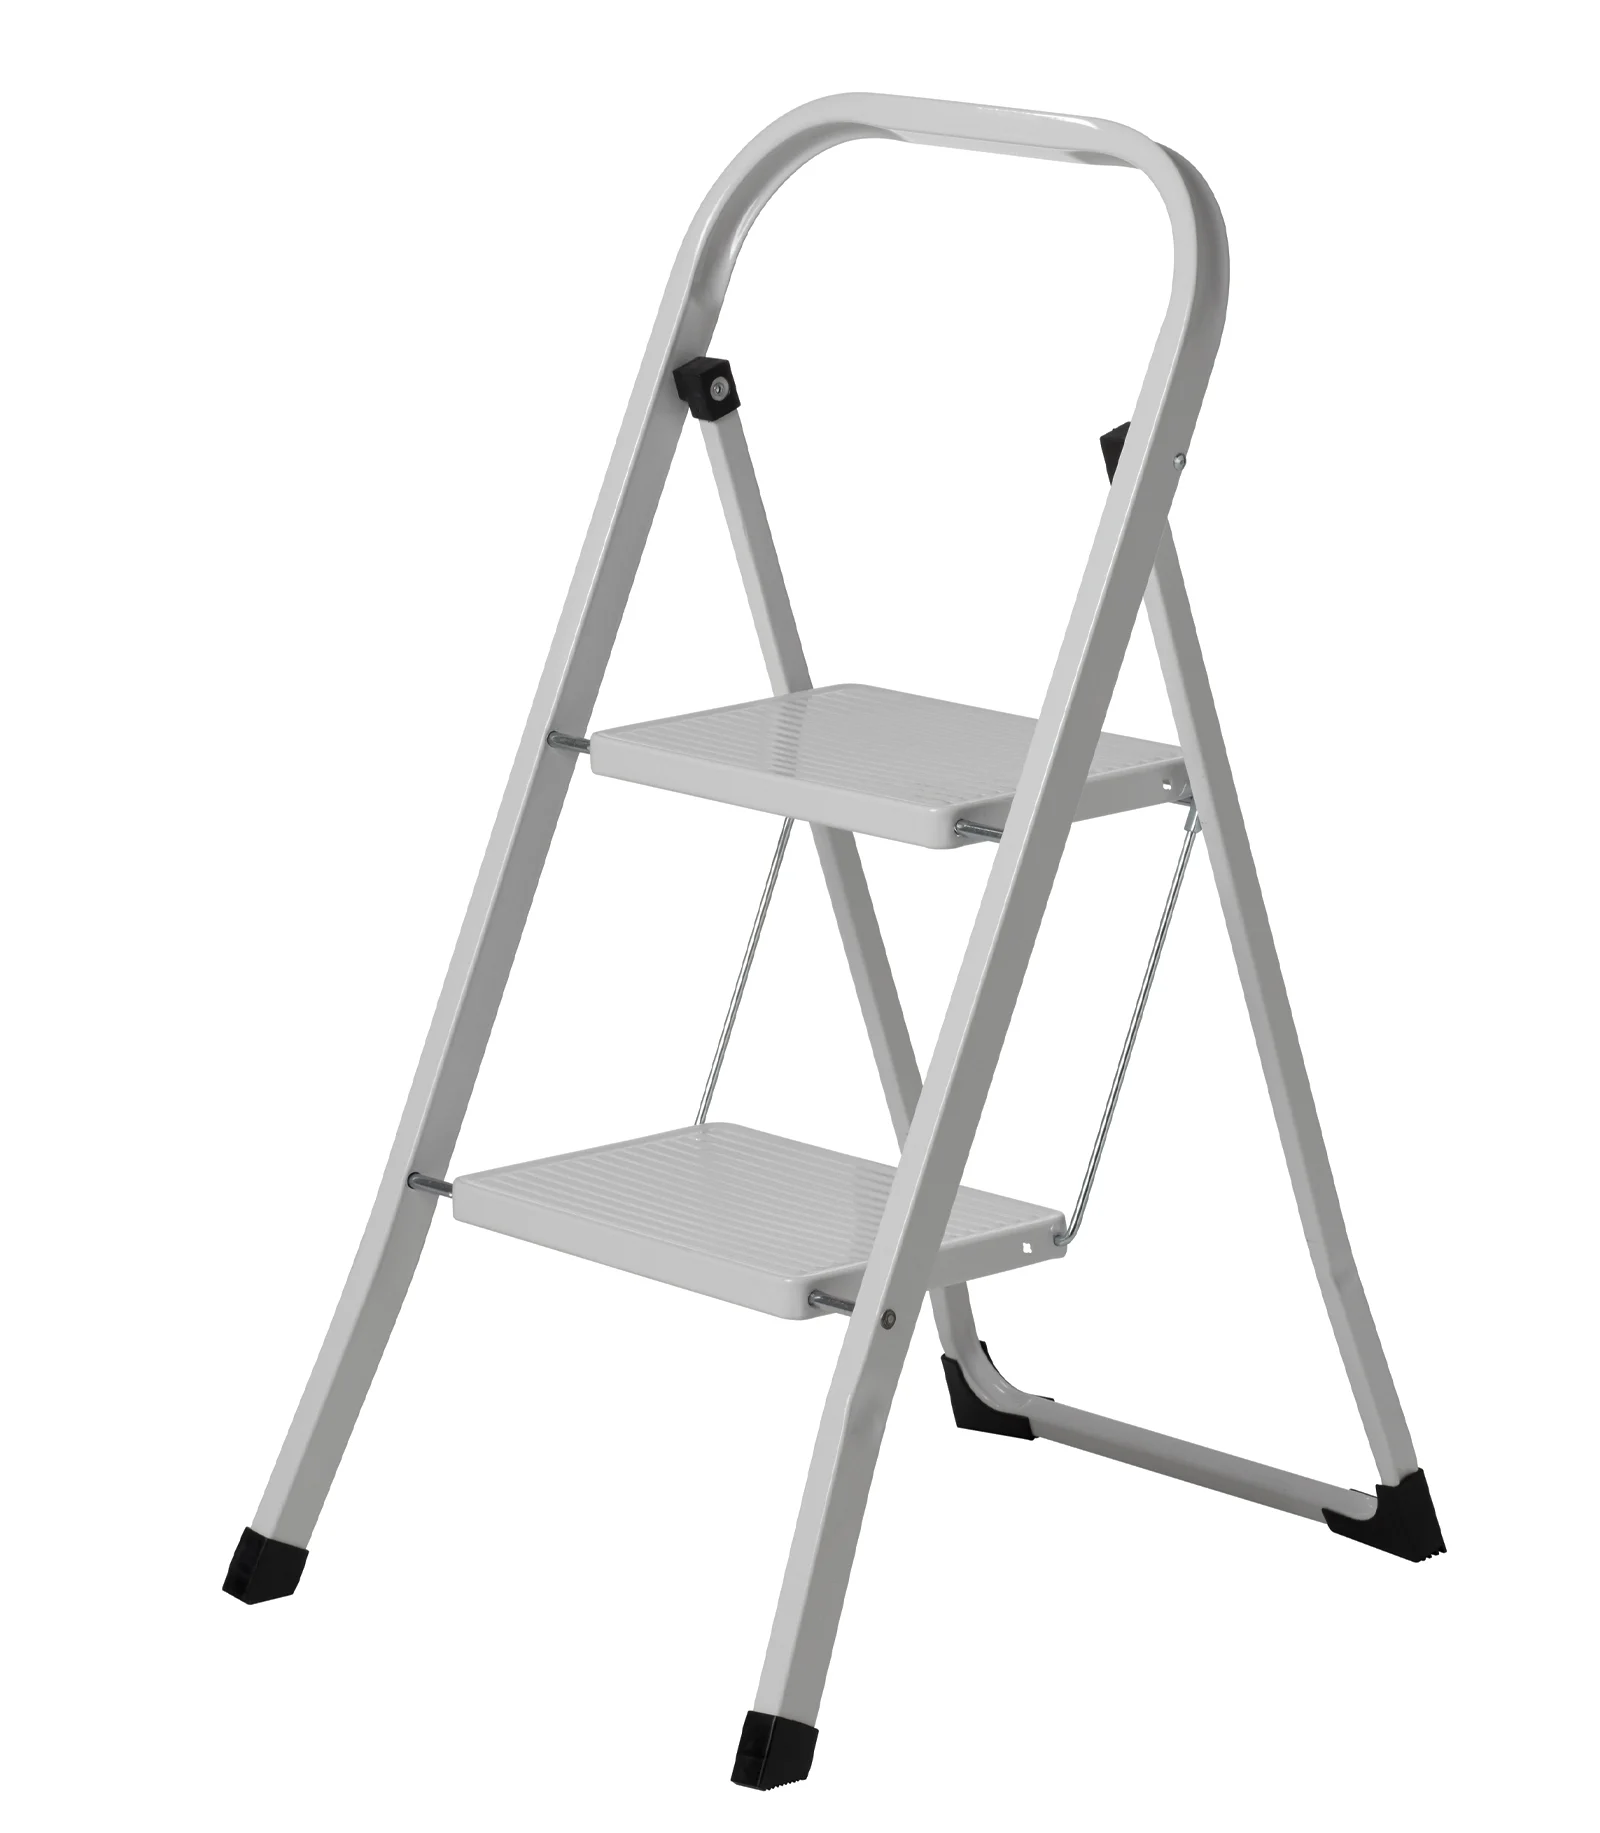 A twin front ladder